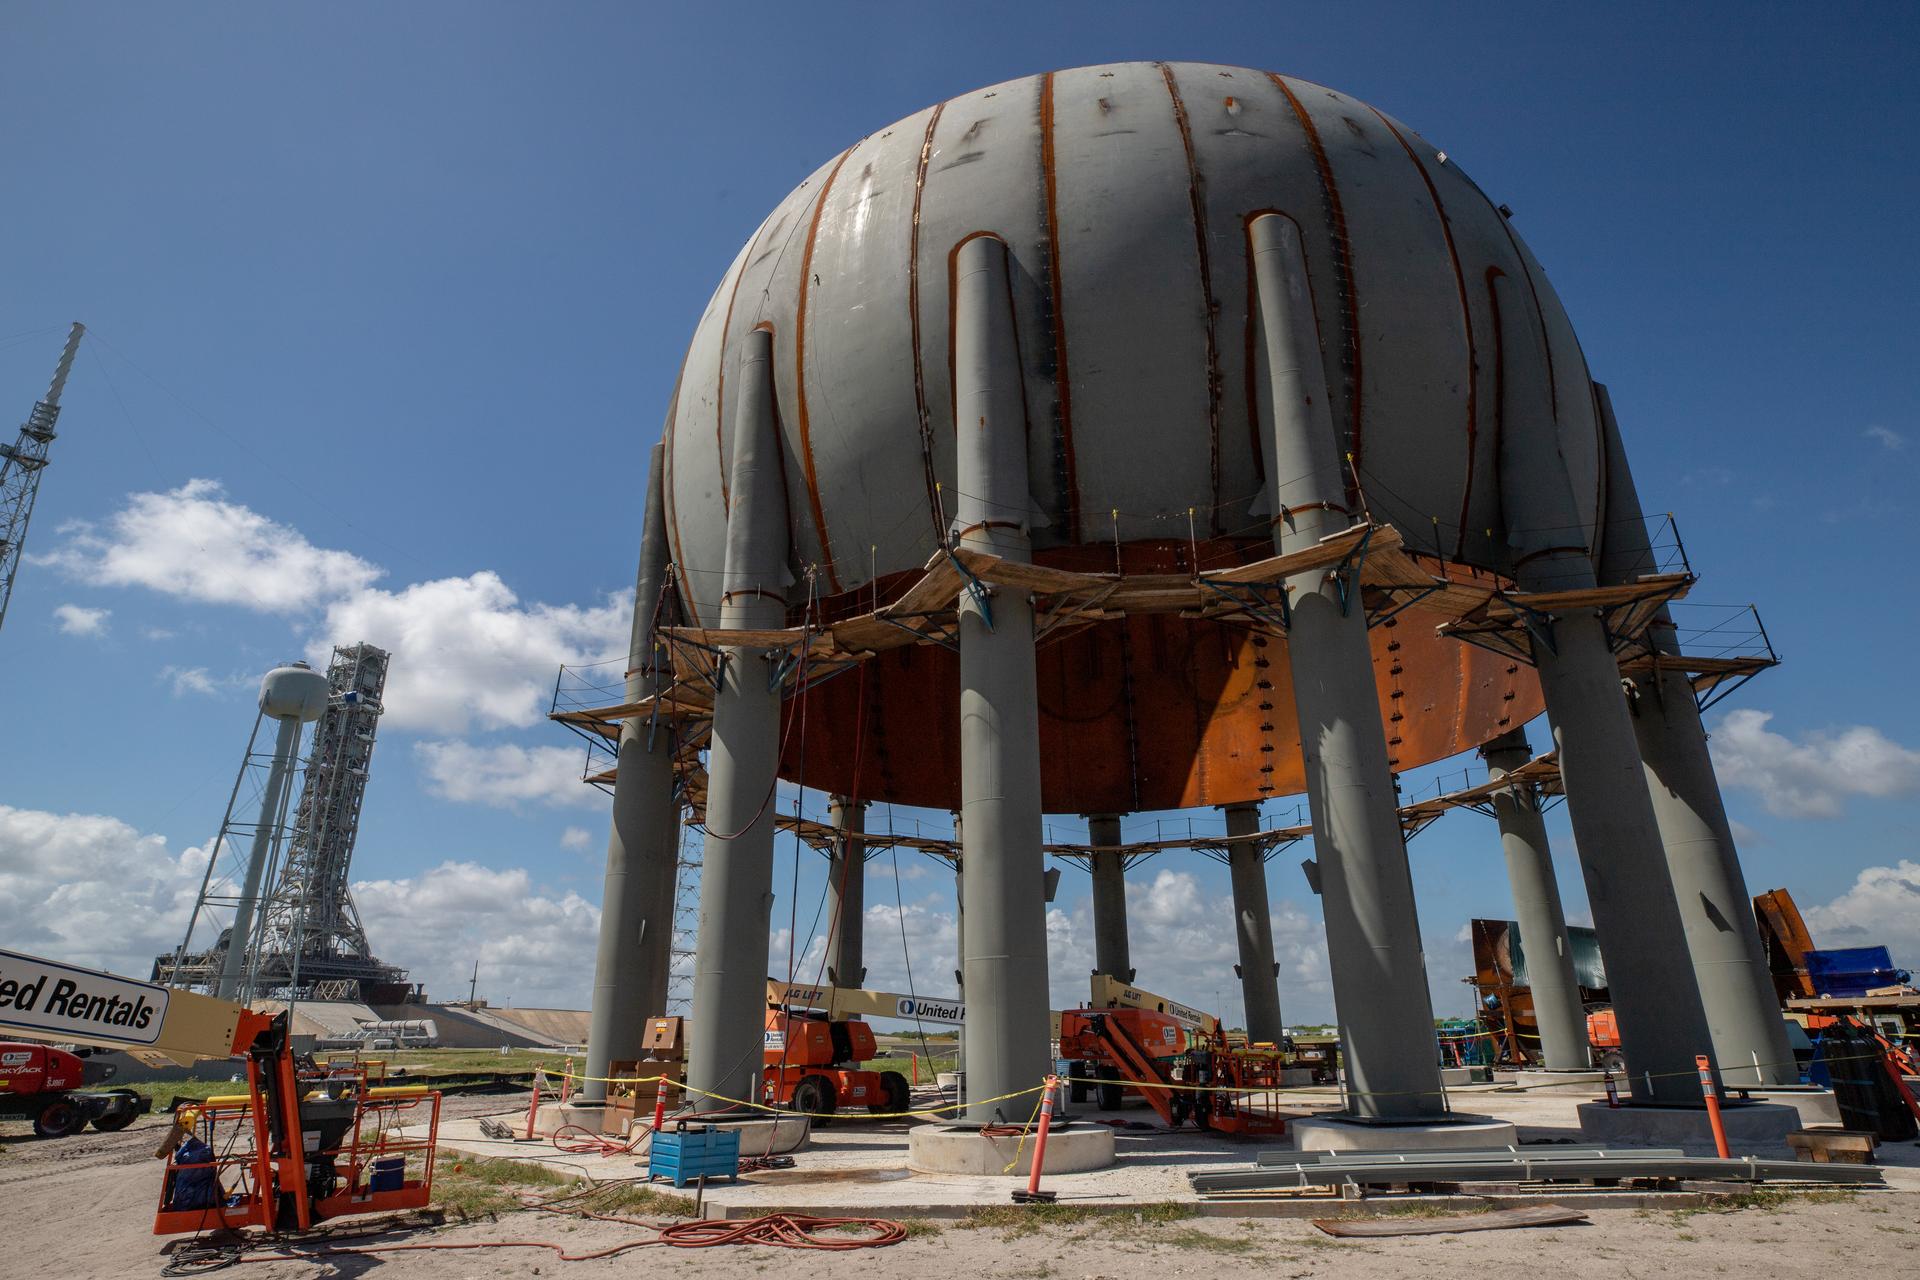 Build-up of a new liquid hydrogen (LH2) storage tank is in progress at Launch Complex 39B at Kennedy Space Center in Florida.